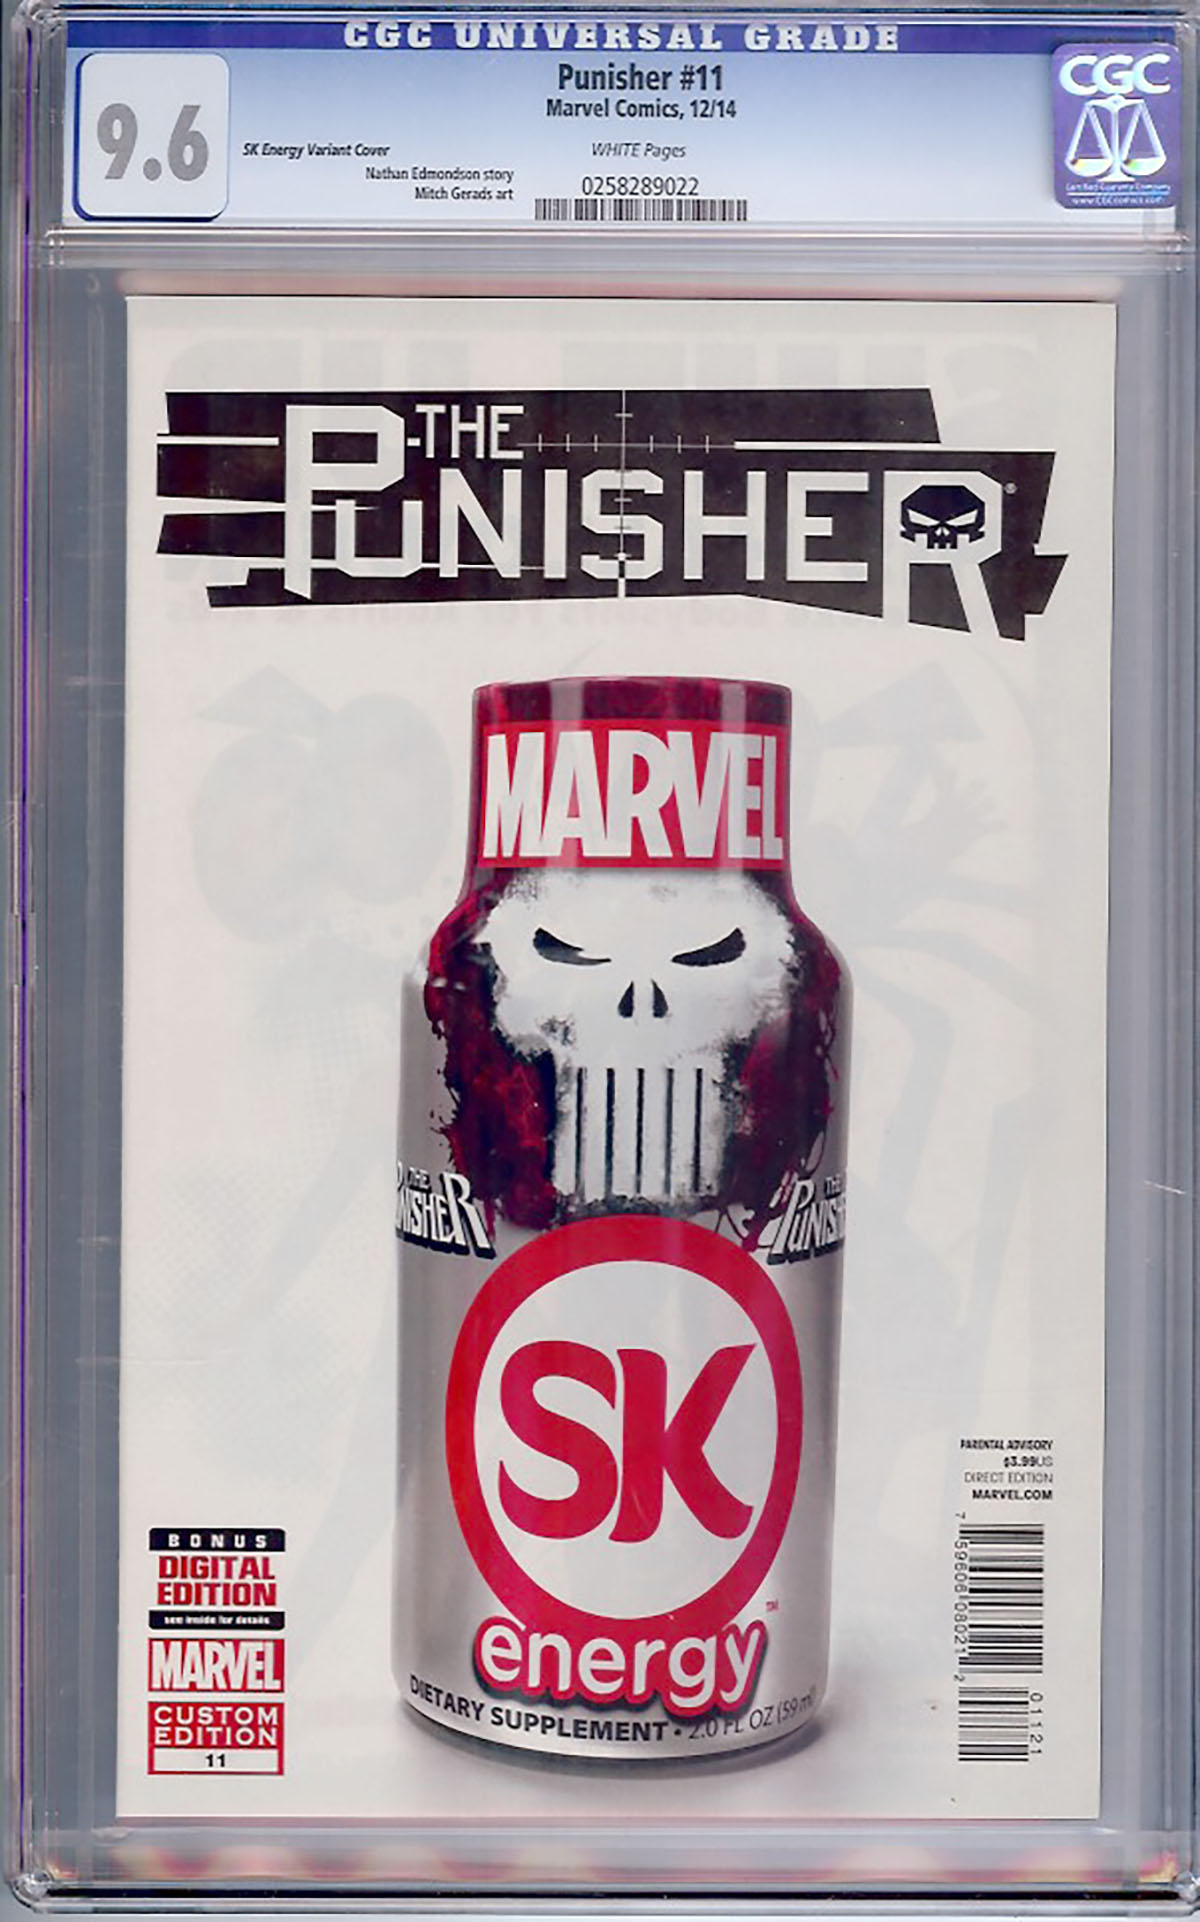 Punisher #11 CGC 9.6 w SK Energy Variant Cover